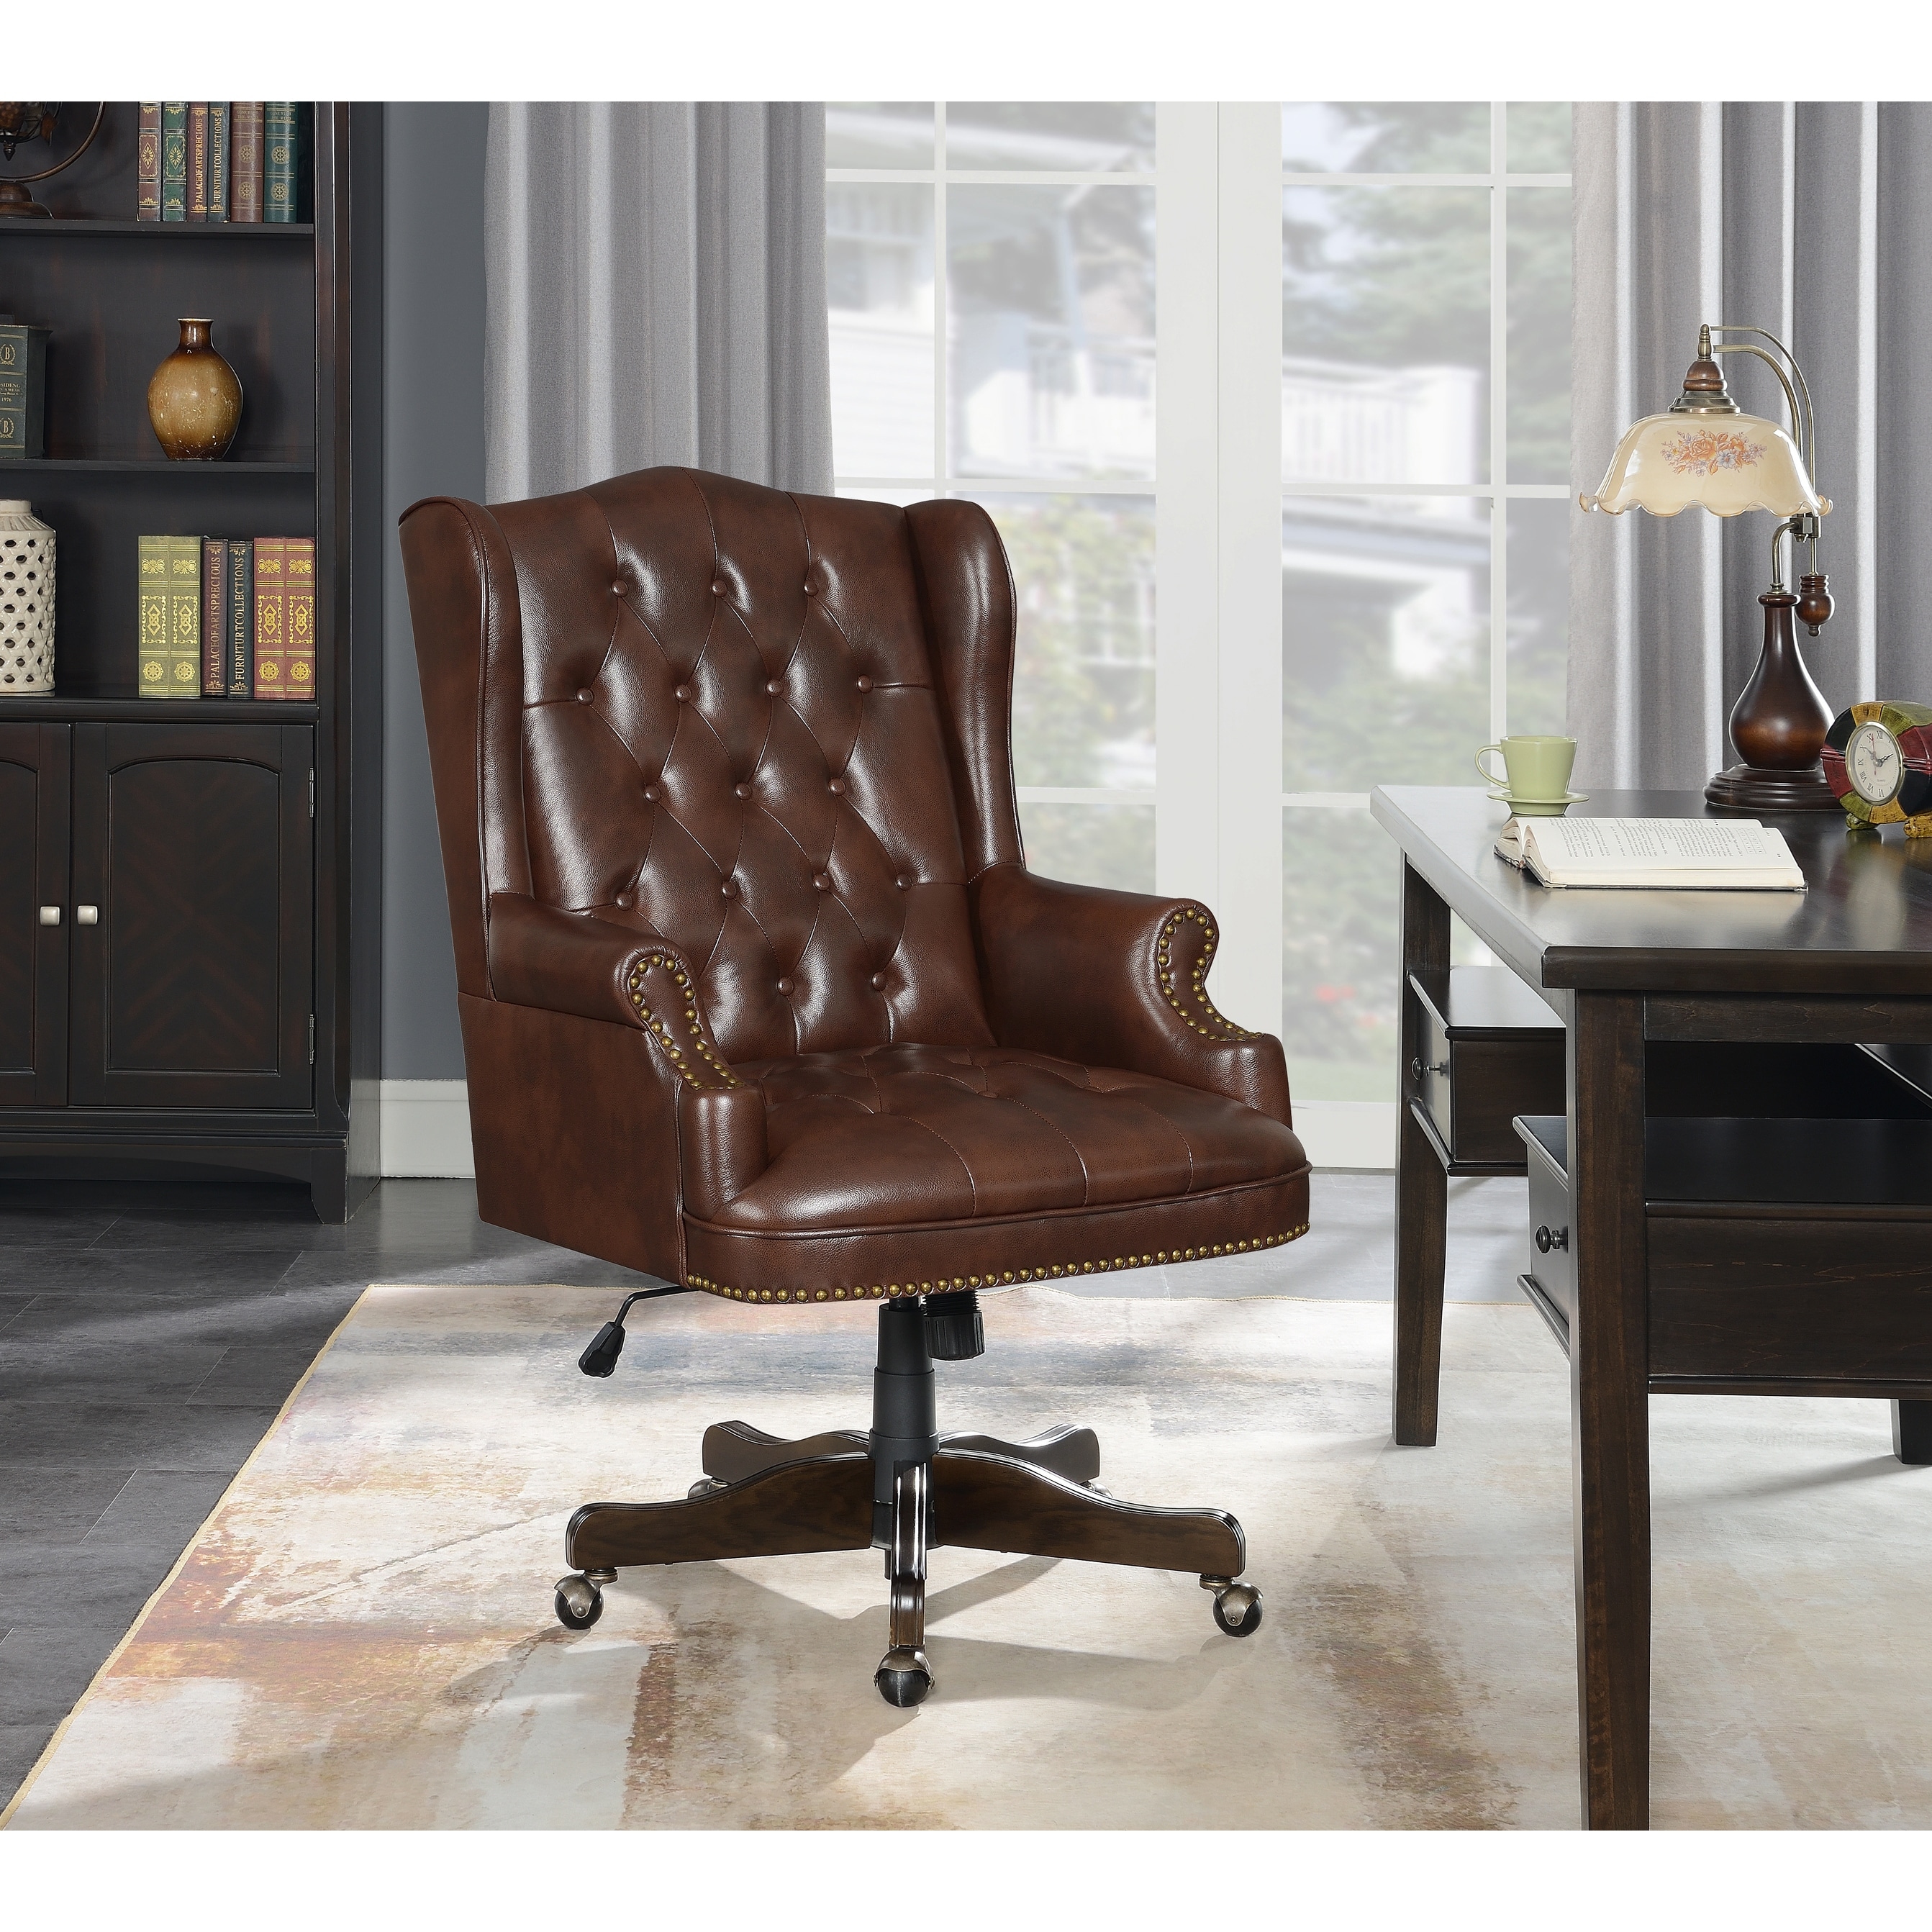 Copper Grove Teaupa Brown and Dark Cherry Height-adjustable Office Chair